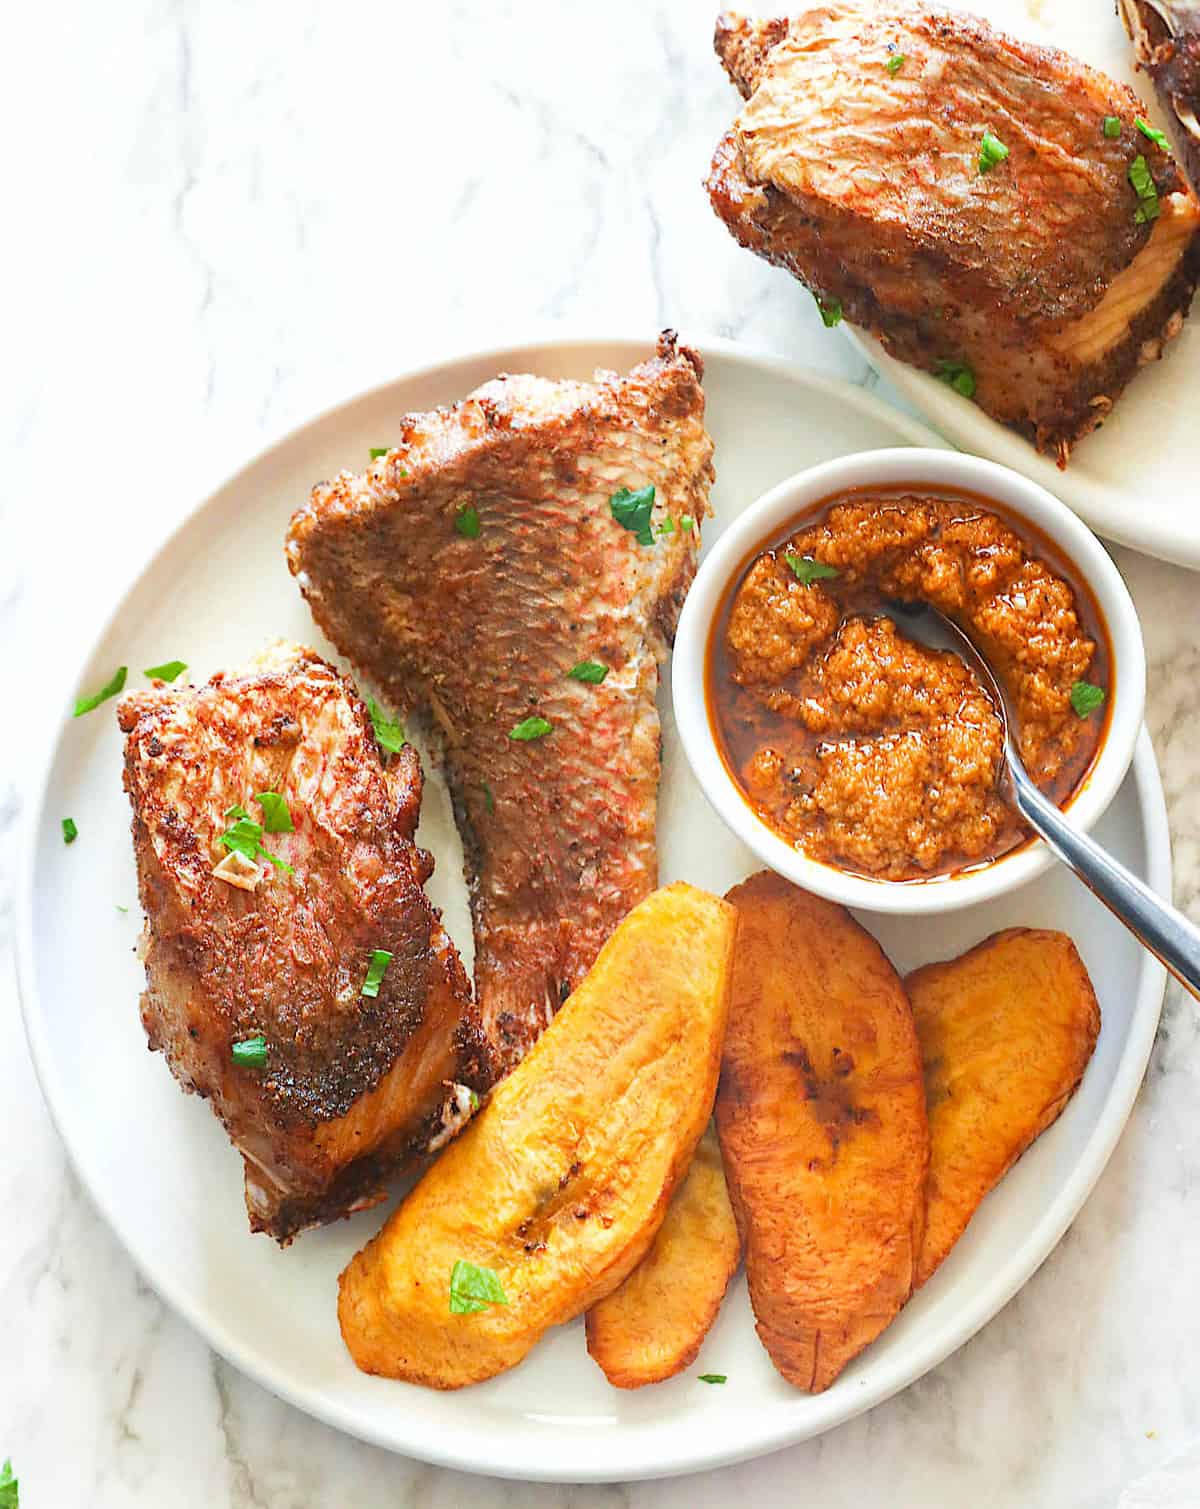 Enjoy fried red sea bream and plantain